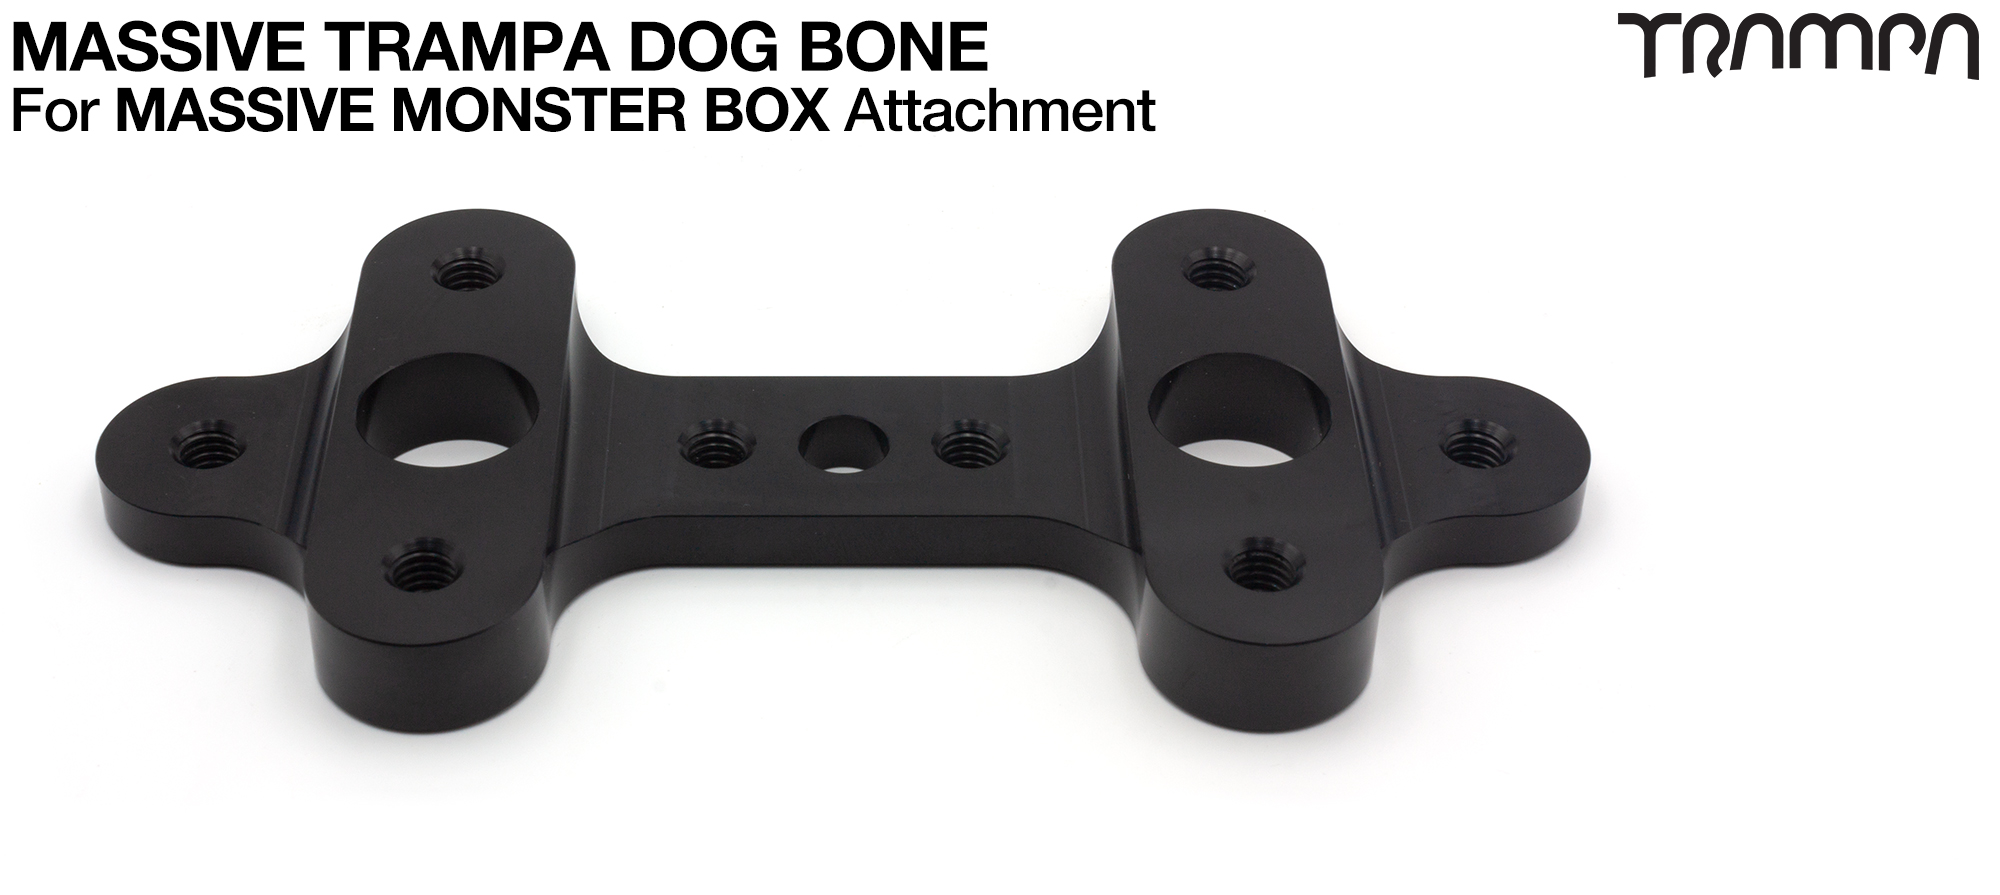 MASSIVE Monster Box DOG BONE is used to mount the Massive Monster box securely to the deck 